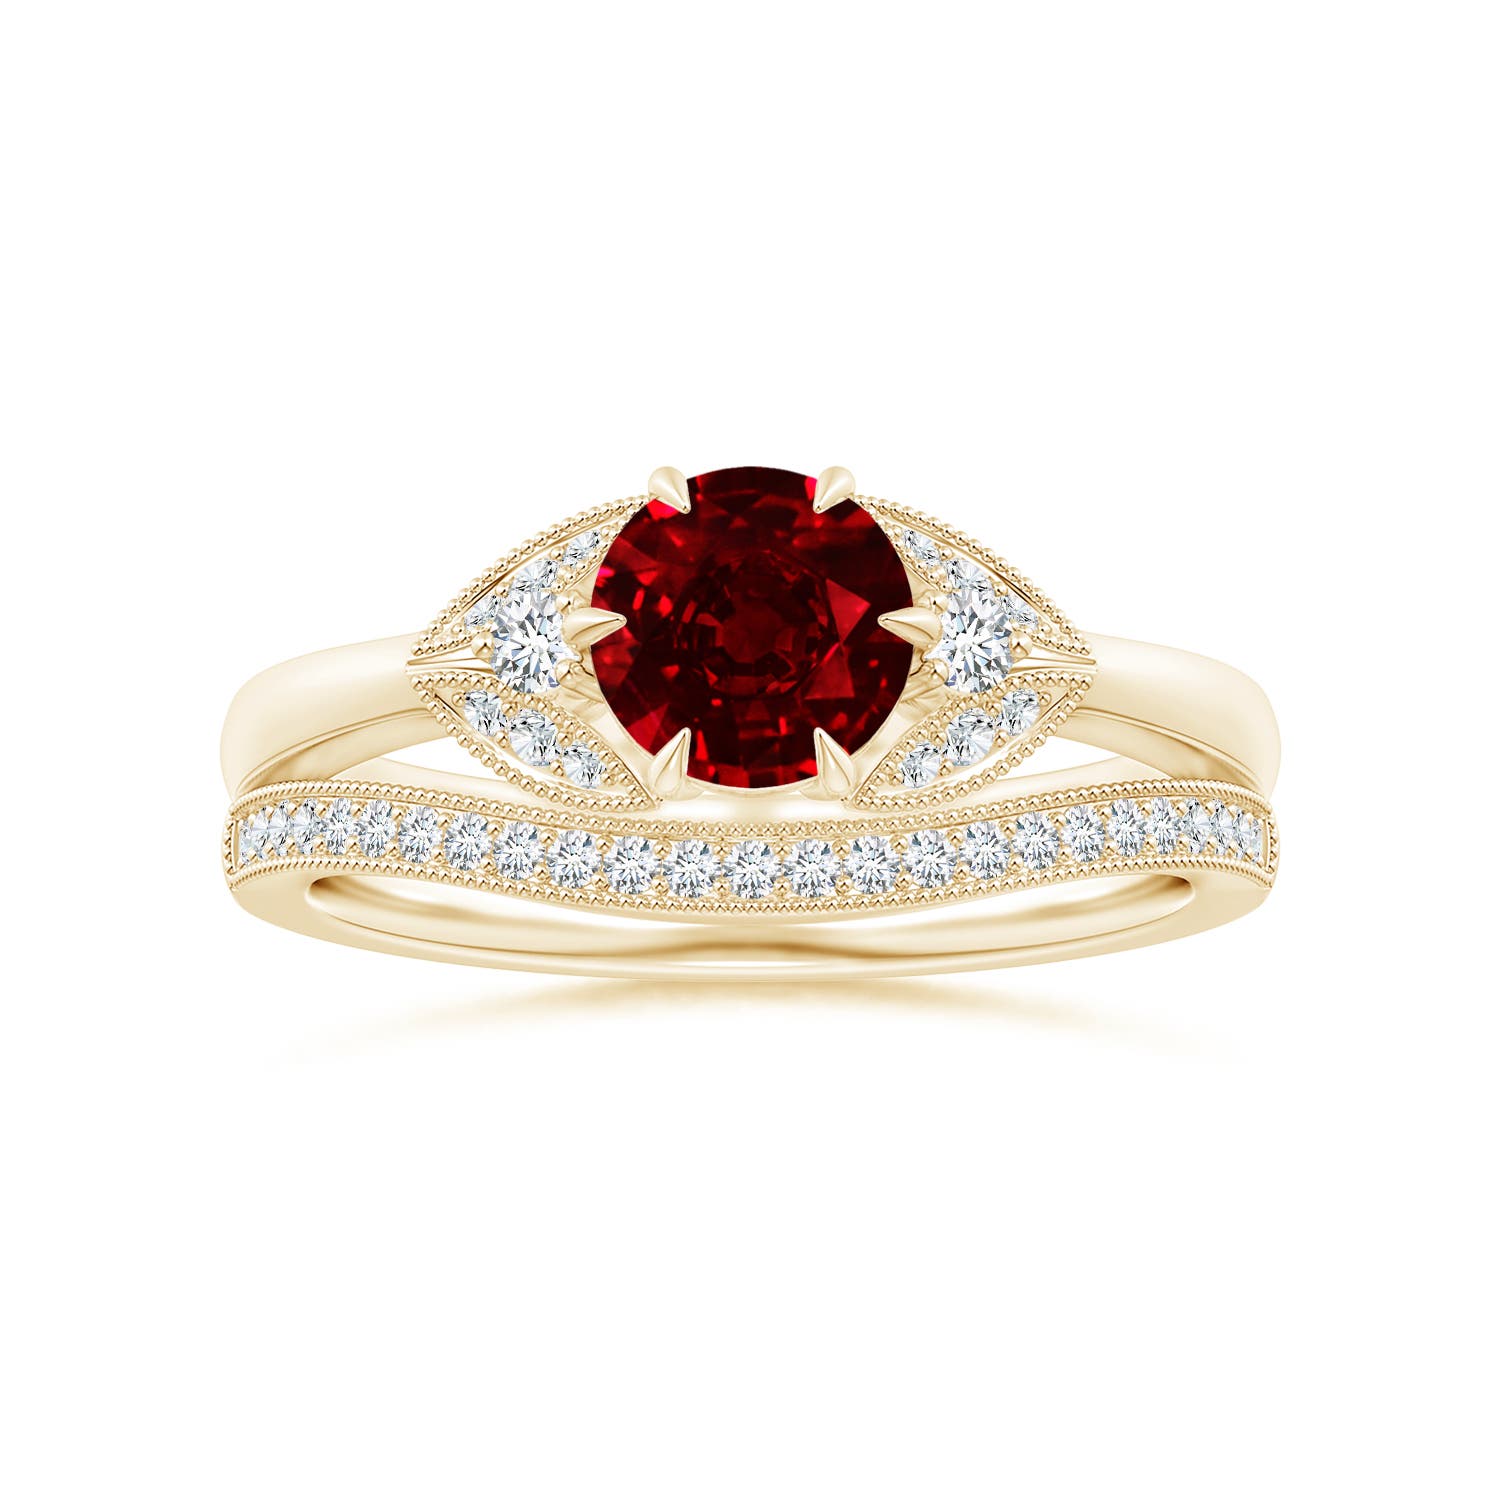 AAAA - Ruby / 1.1 CT / 14 KT Yellow Gold